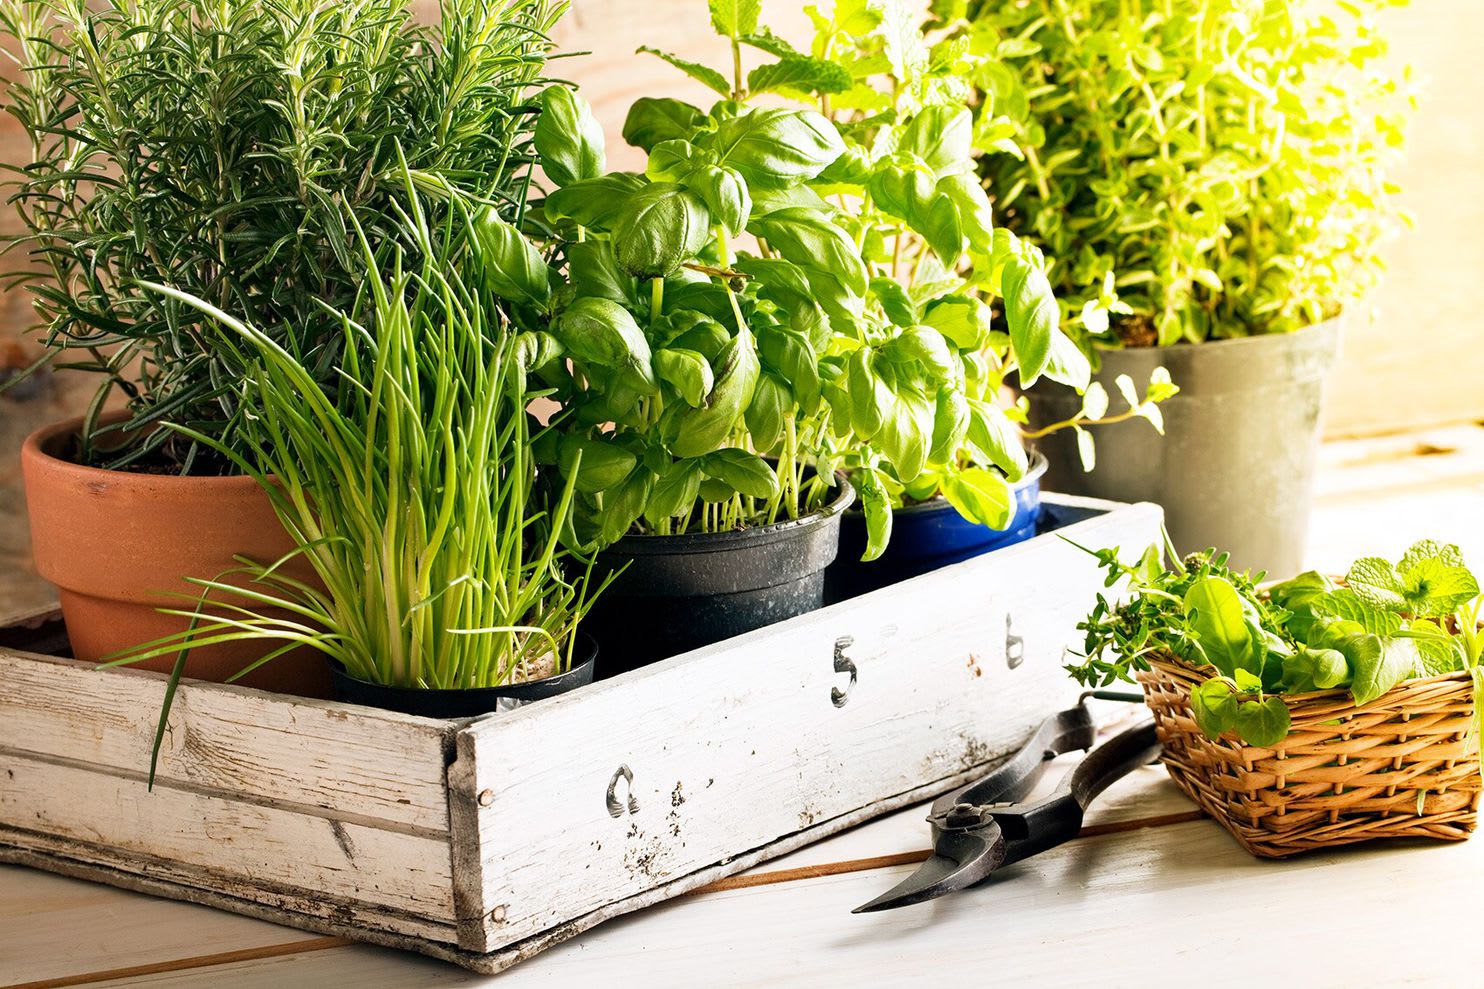 When life gives you herbs by the fistful, put them to use in sauces, salads and drinks